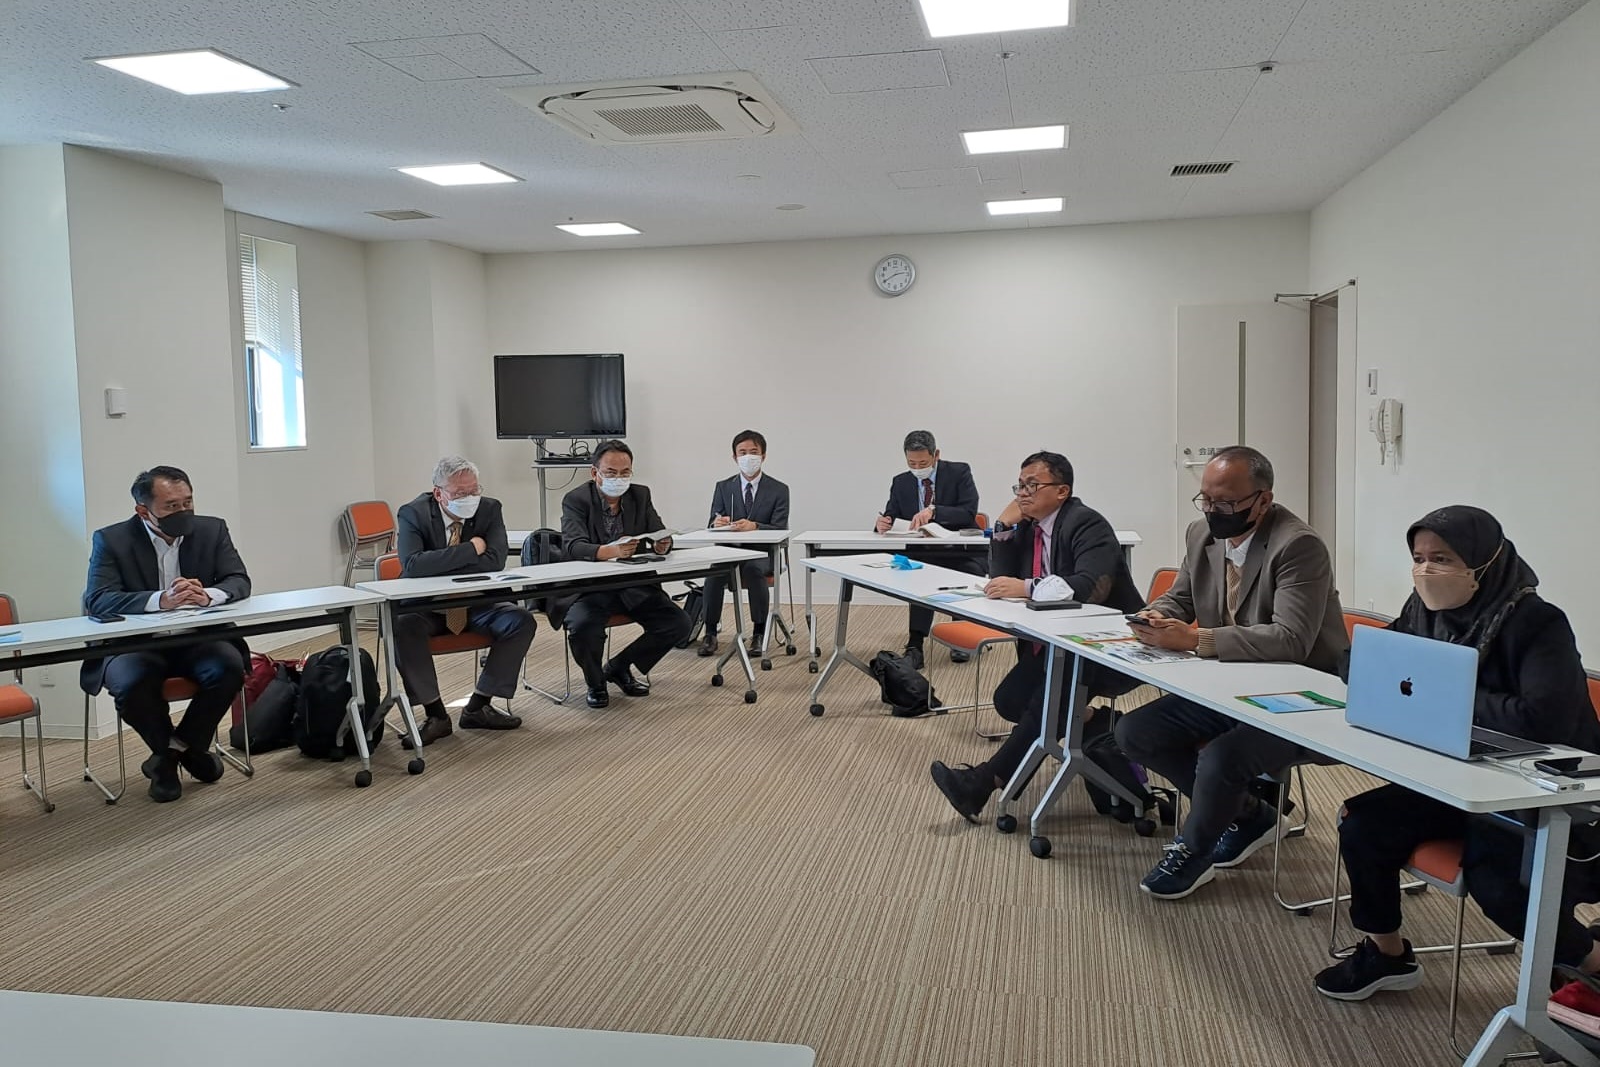 Led by Secretary General, Ministry of Social Affairs Delegation Conducts Best Practice Study in Japan